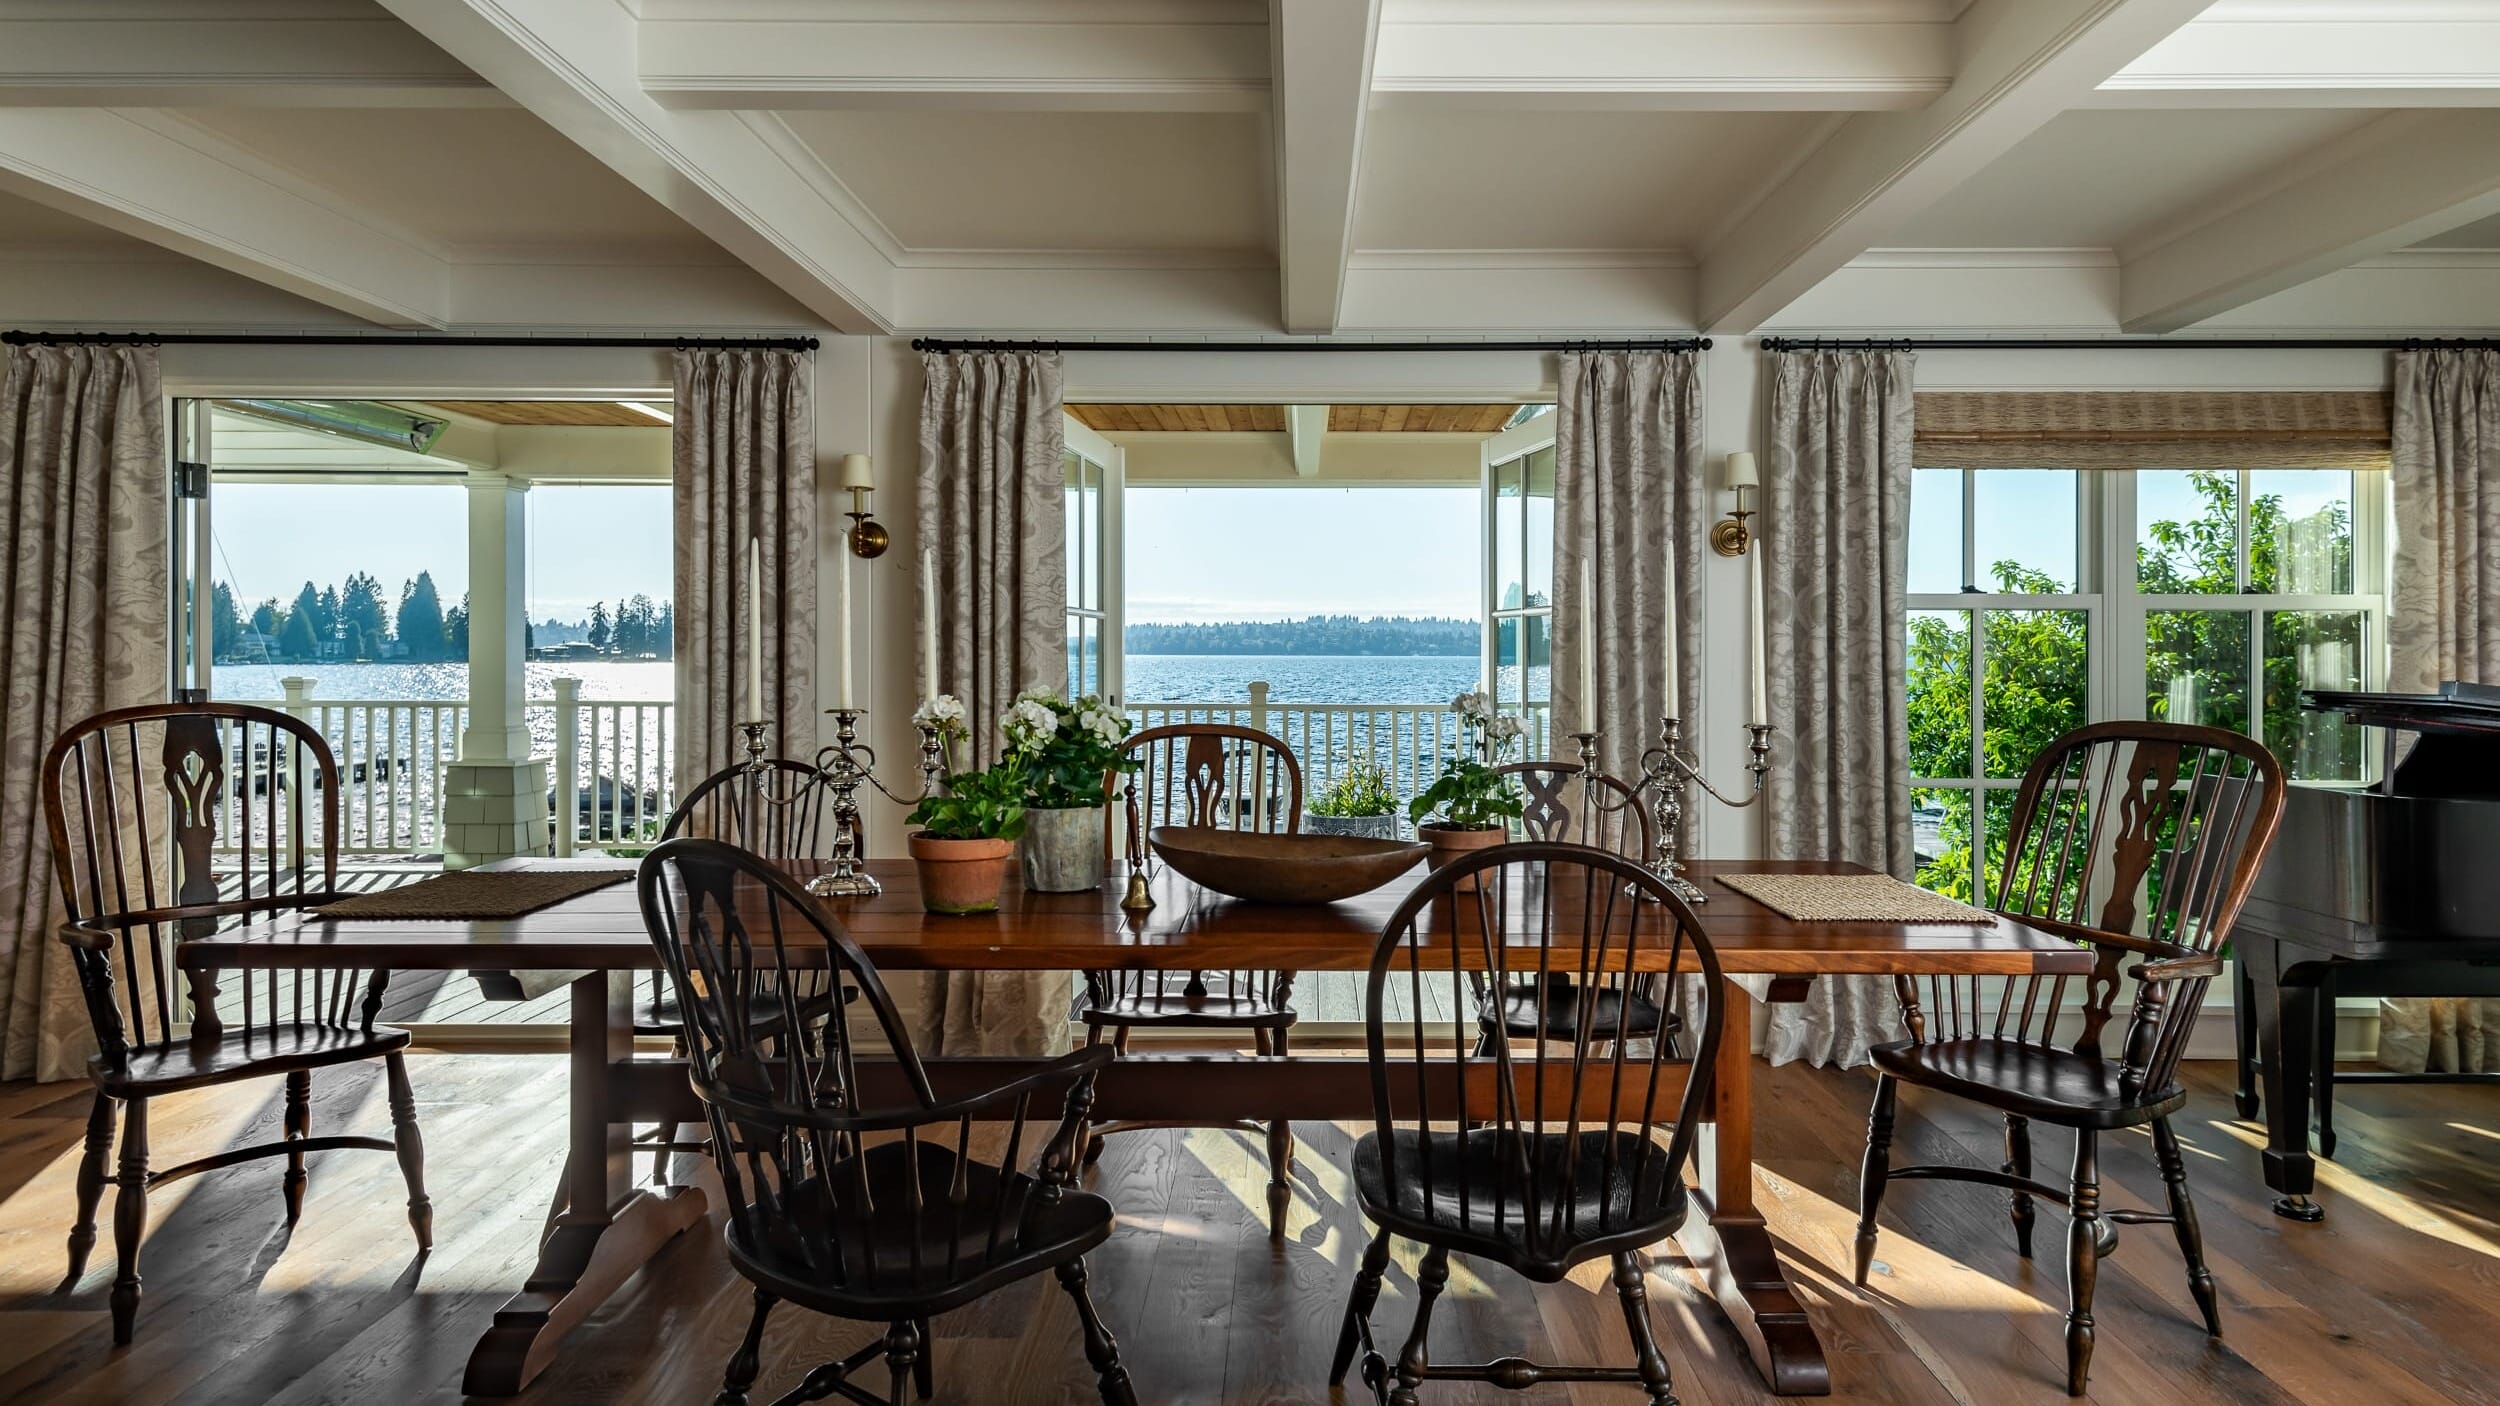 A dining room with large windows overlooking the water.